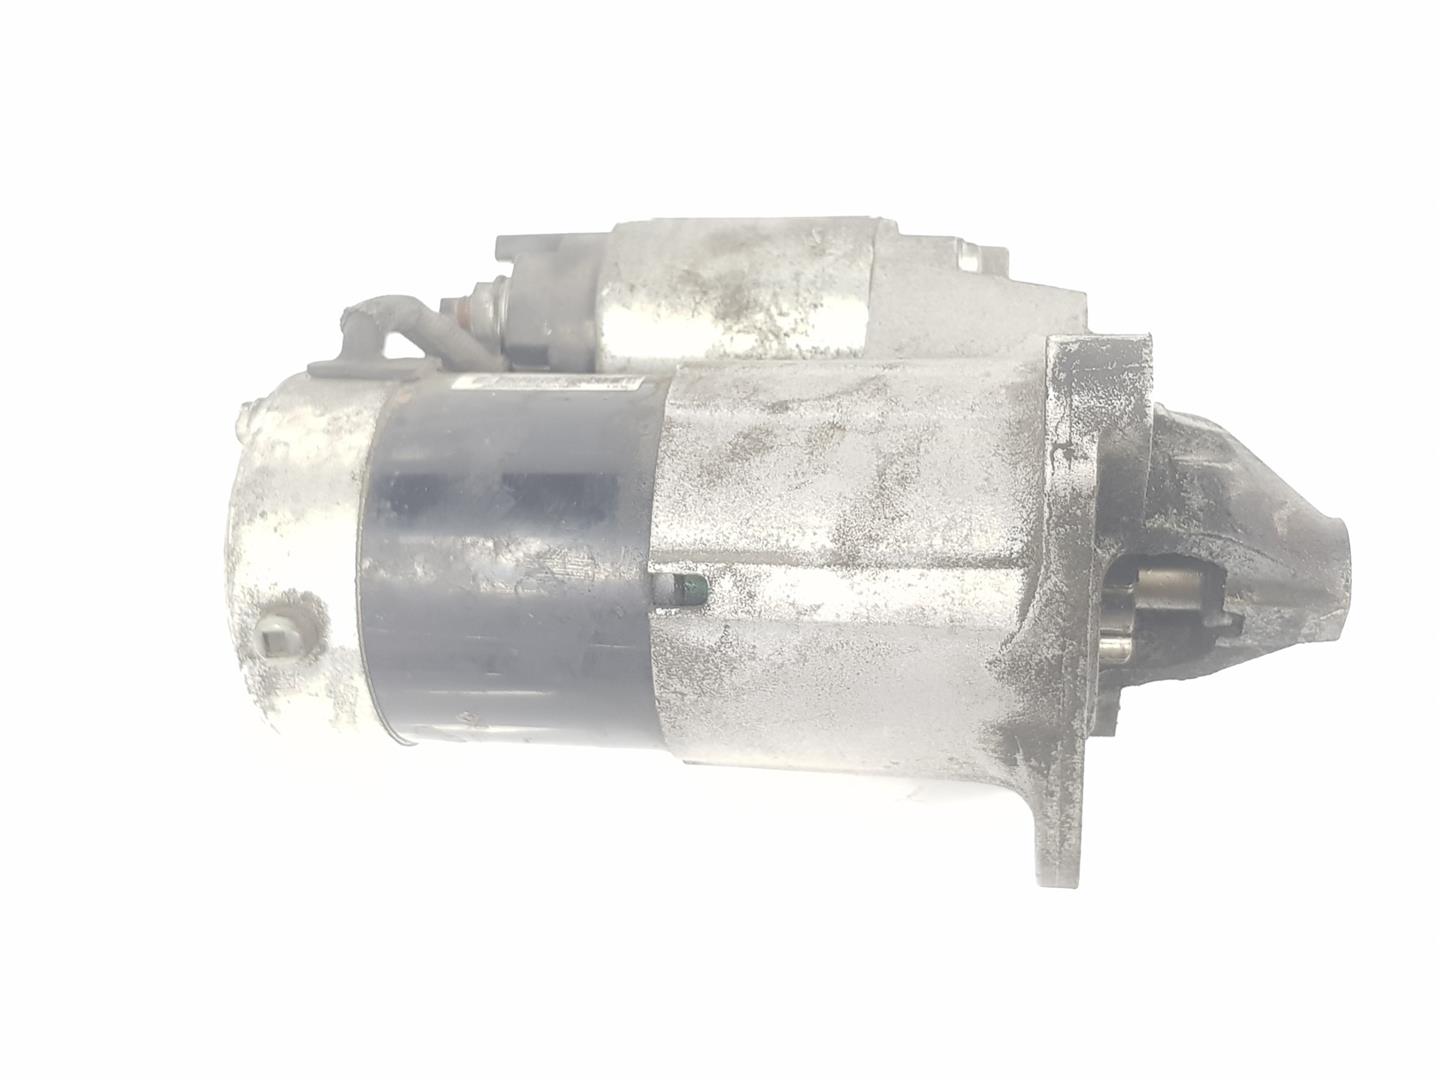 RENAULT Scenic 2 generation (2003-2010) Starter Motor 8200584675A, 8200584675A 24212889